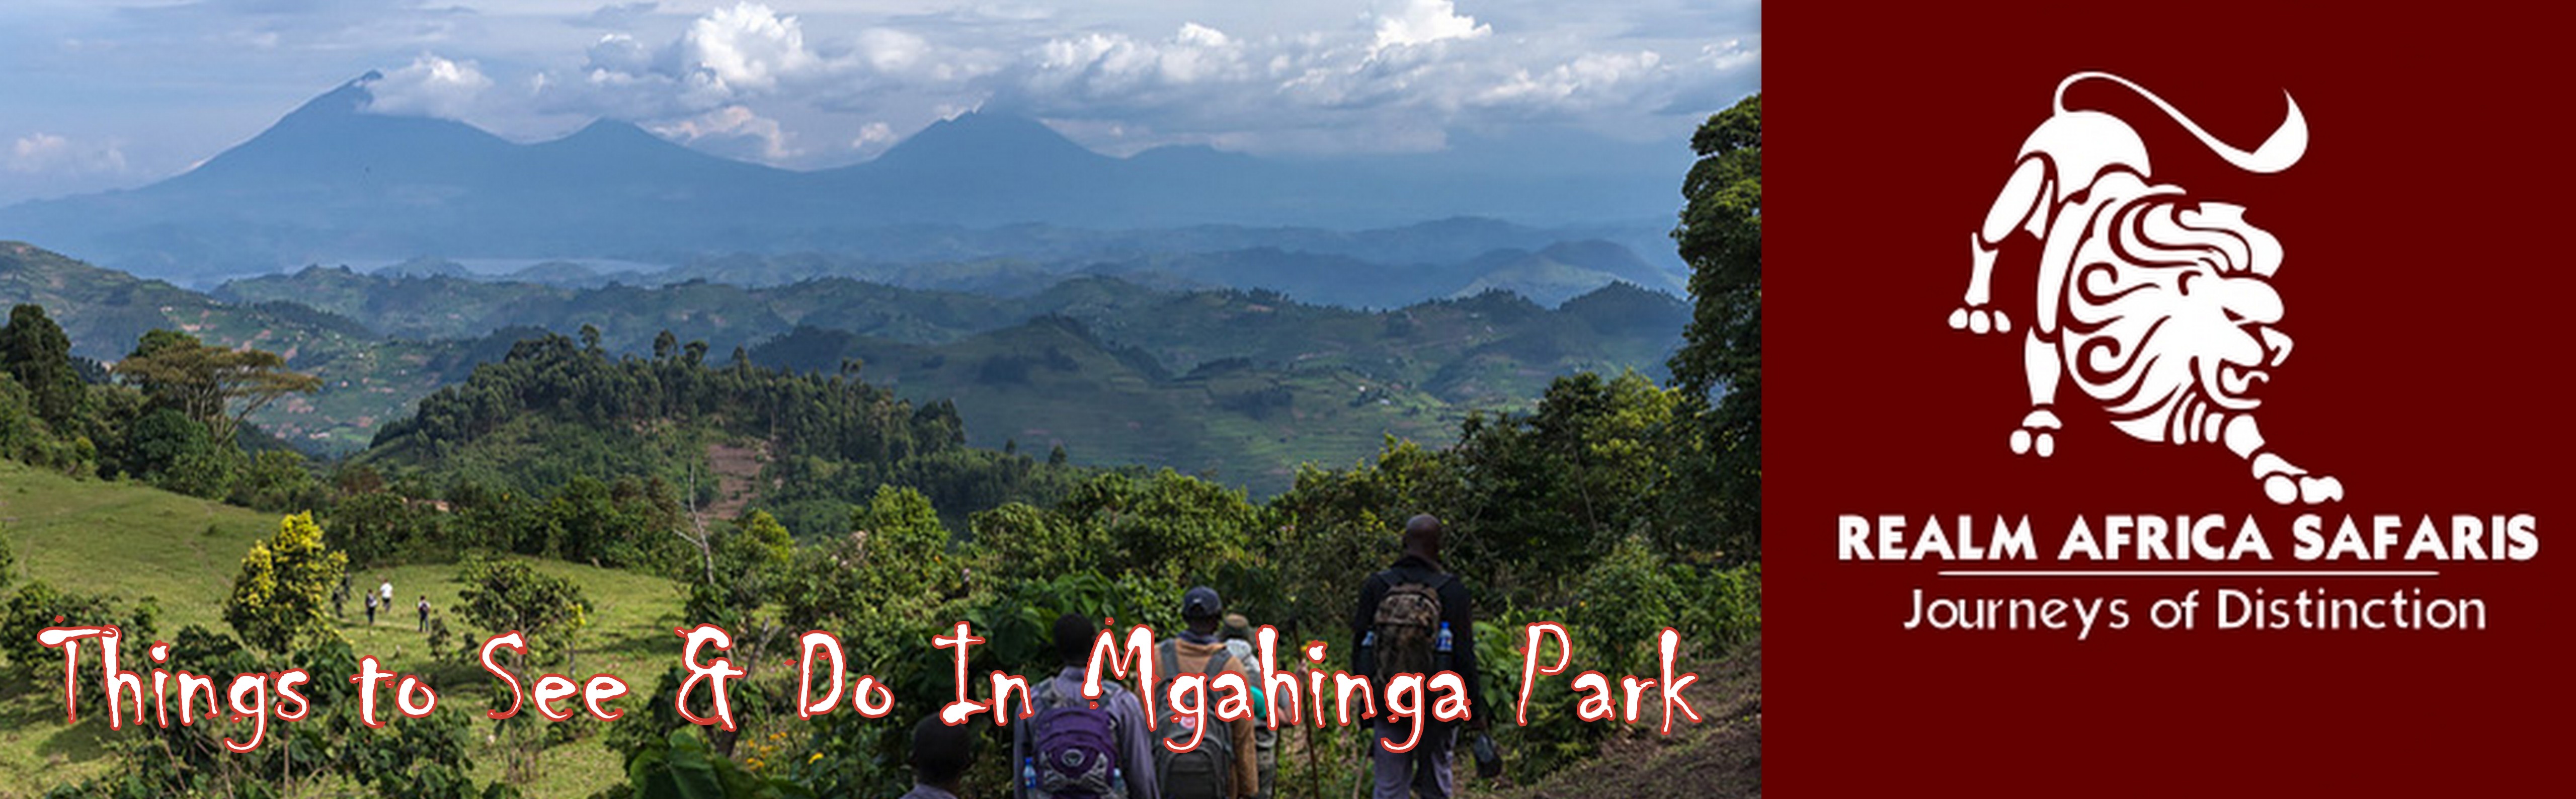 Things To see and do in Mgahinga Gorilla National Park | Realm Africa Safaris